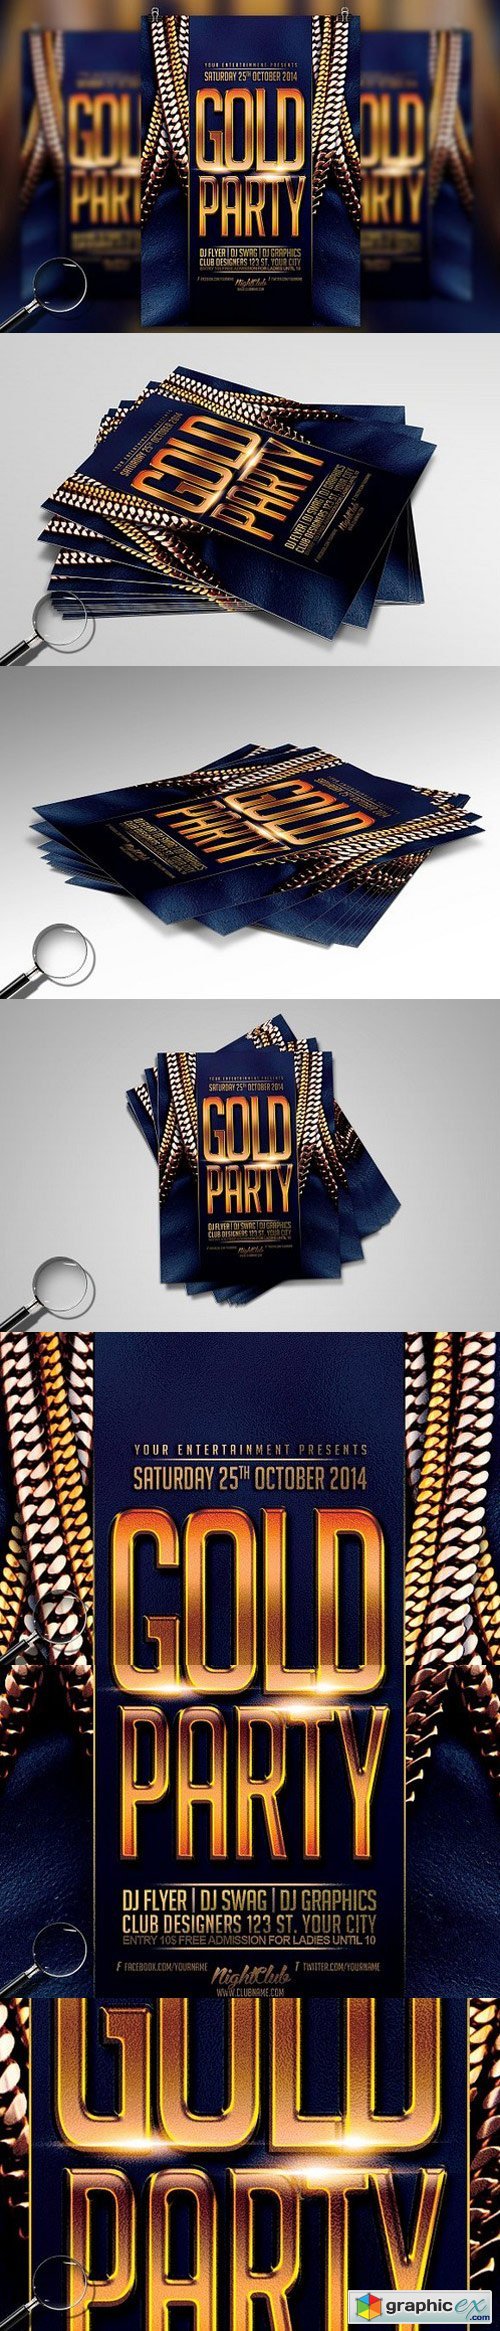 Gold Party | Urban Flyer Template